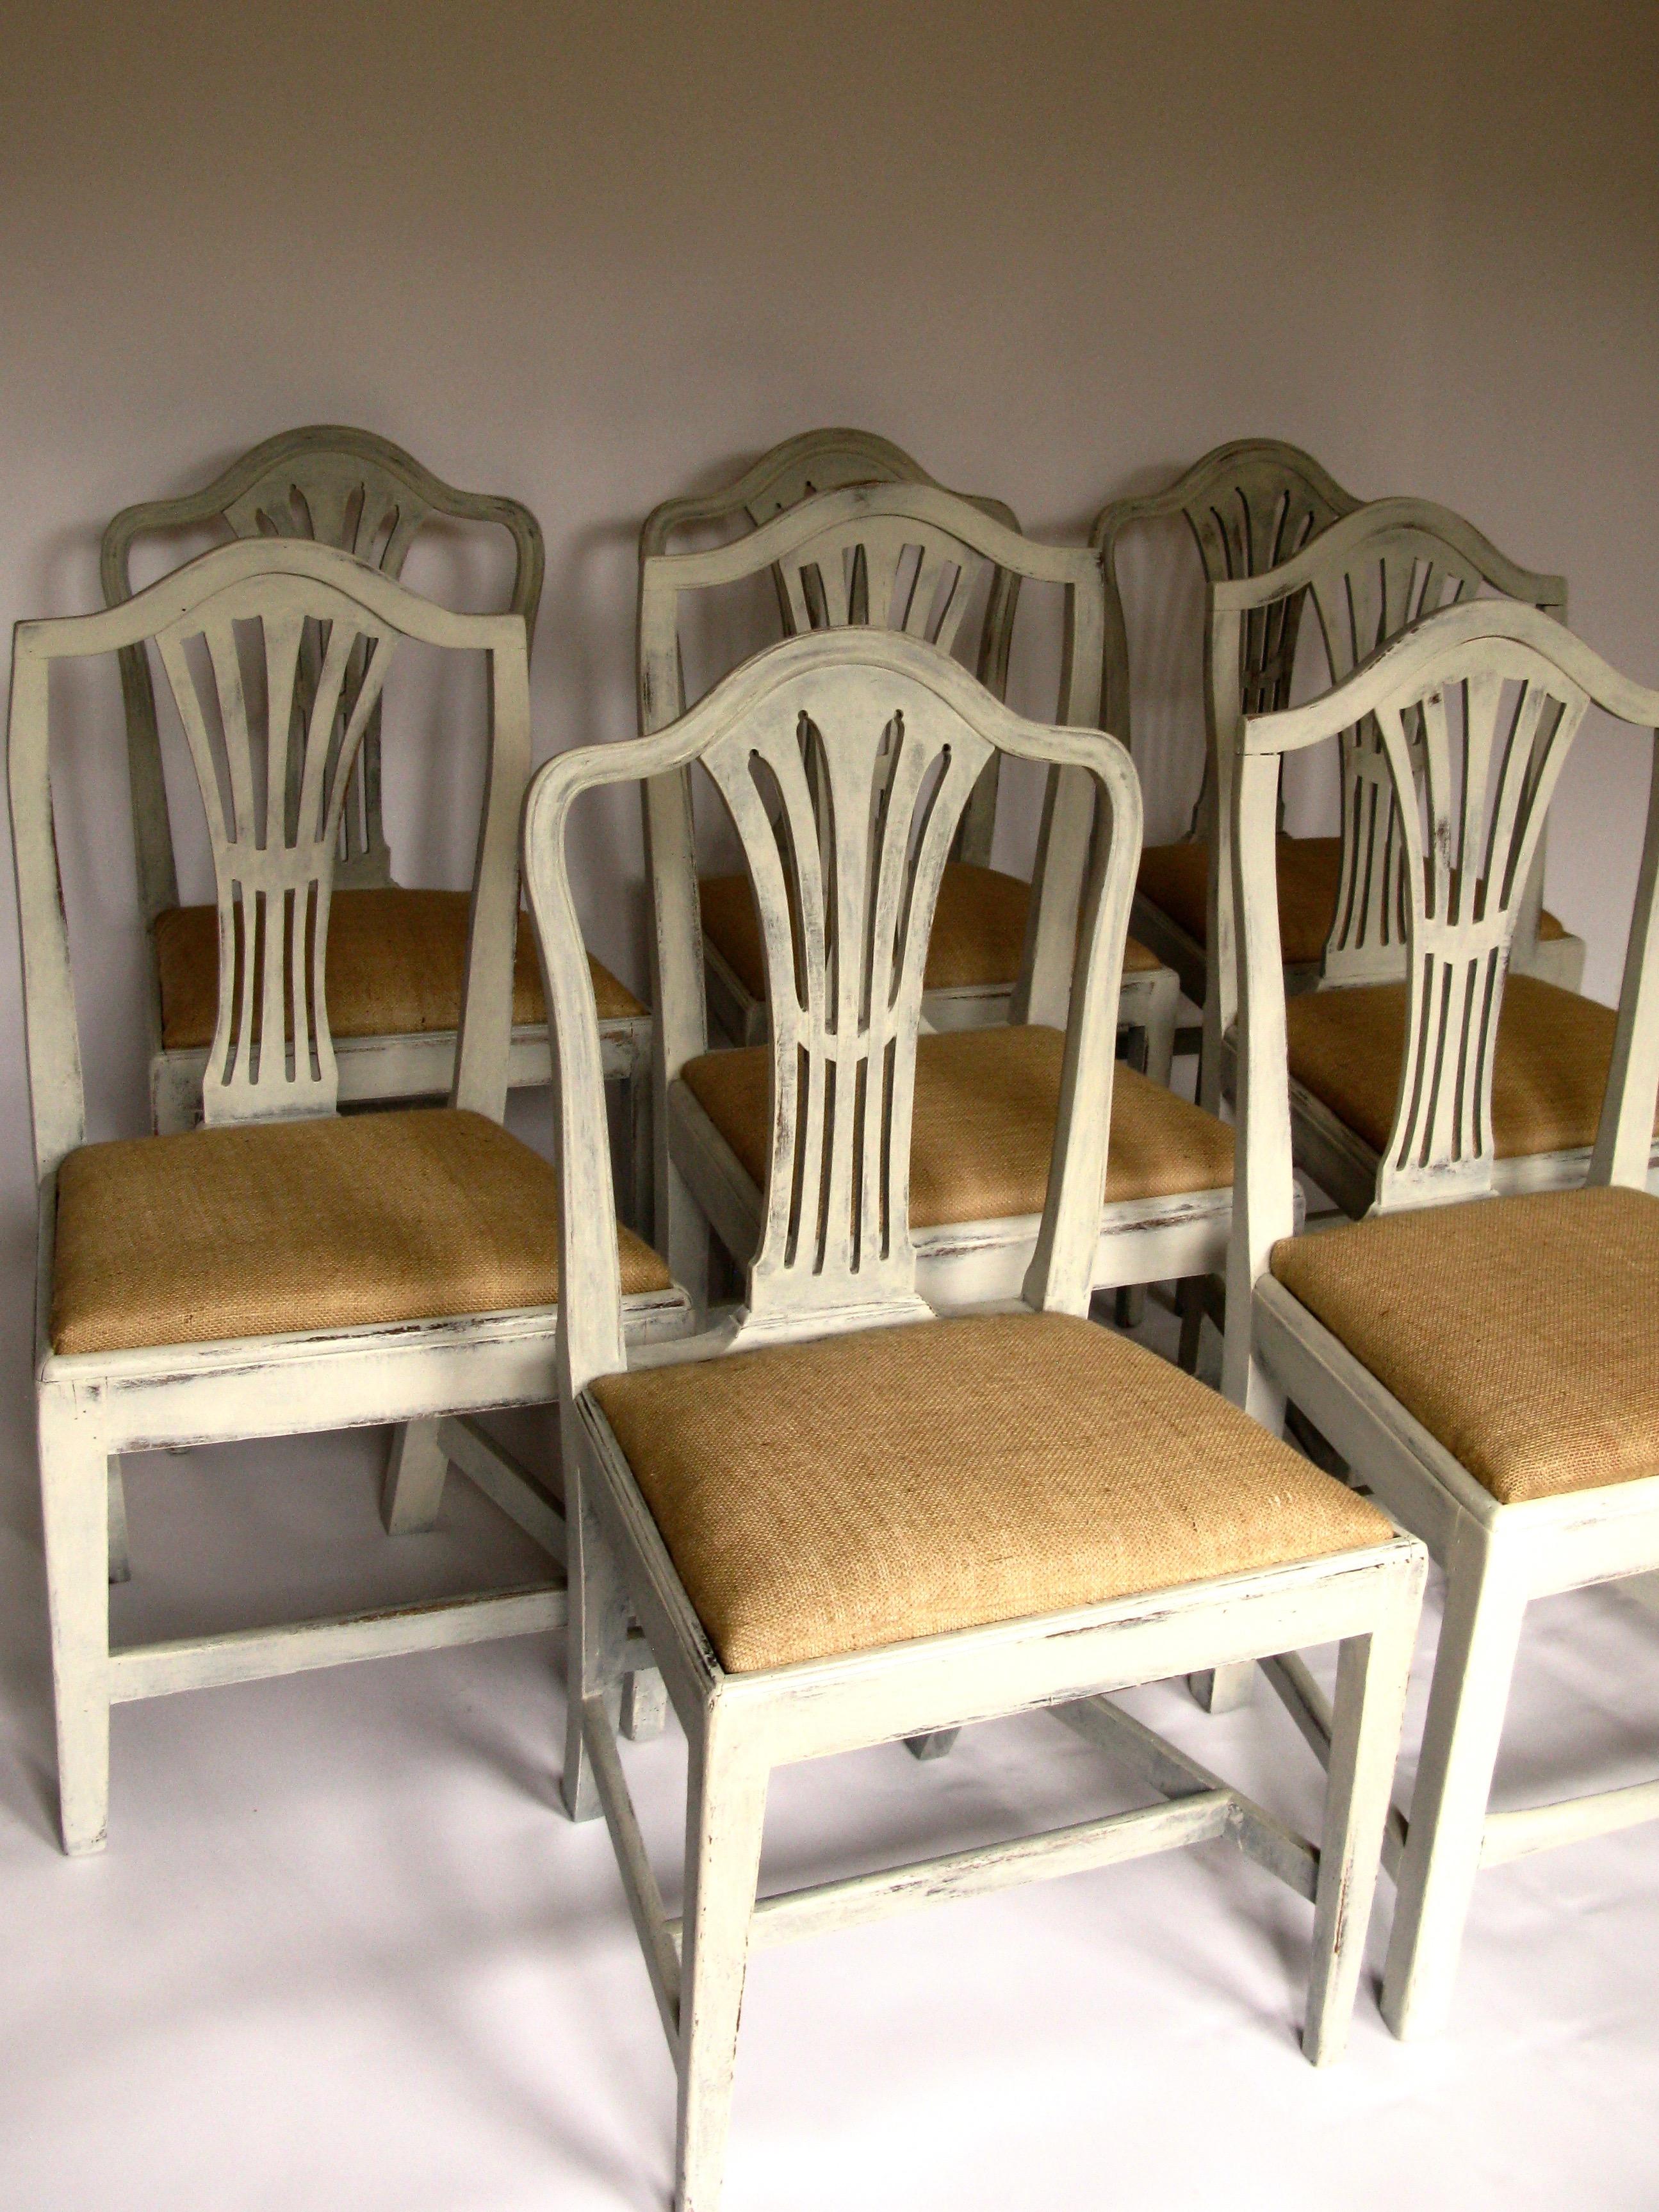 Lovely set of 8 Harlequin antique chairs, Hepplewhite period, early 19th century, with new restored seats with jute, origin United Kingdom
These chairs are in perfect condition and look marvellous on dining or kitchen table. (Painted)
Measures: